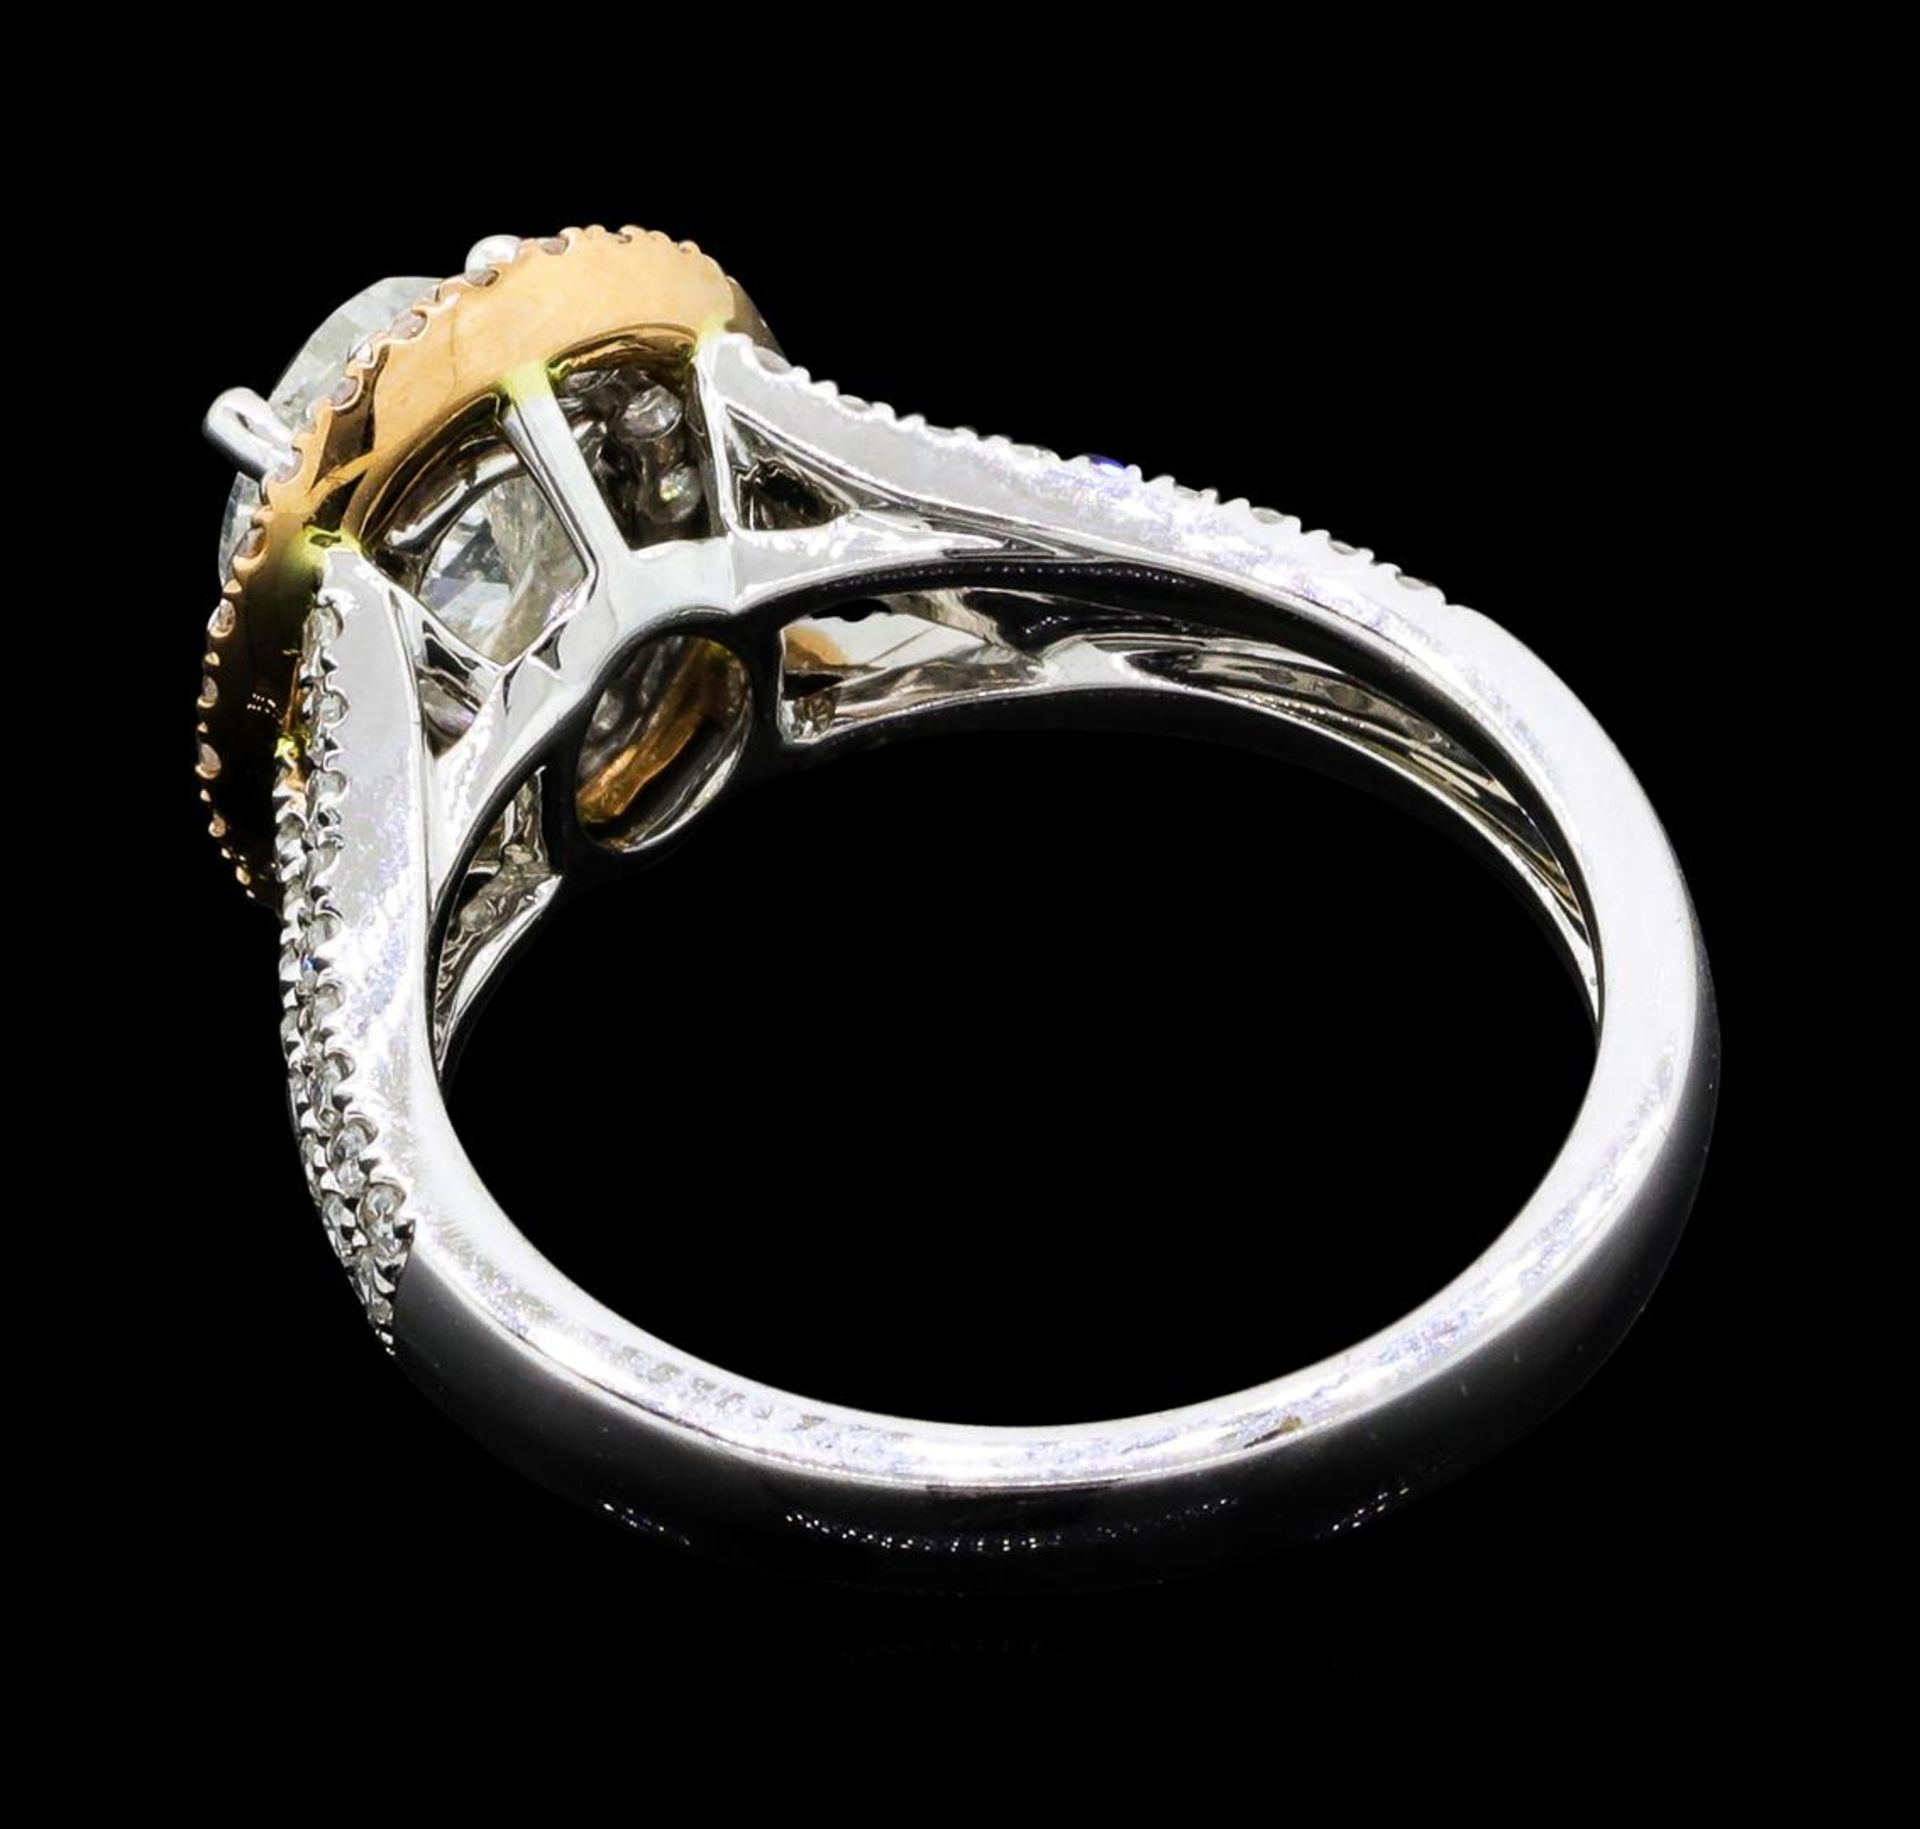 1.54 ctw Diamond Ring - 18KT White And Yellow Gold - Image 3 of 5